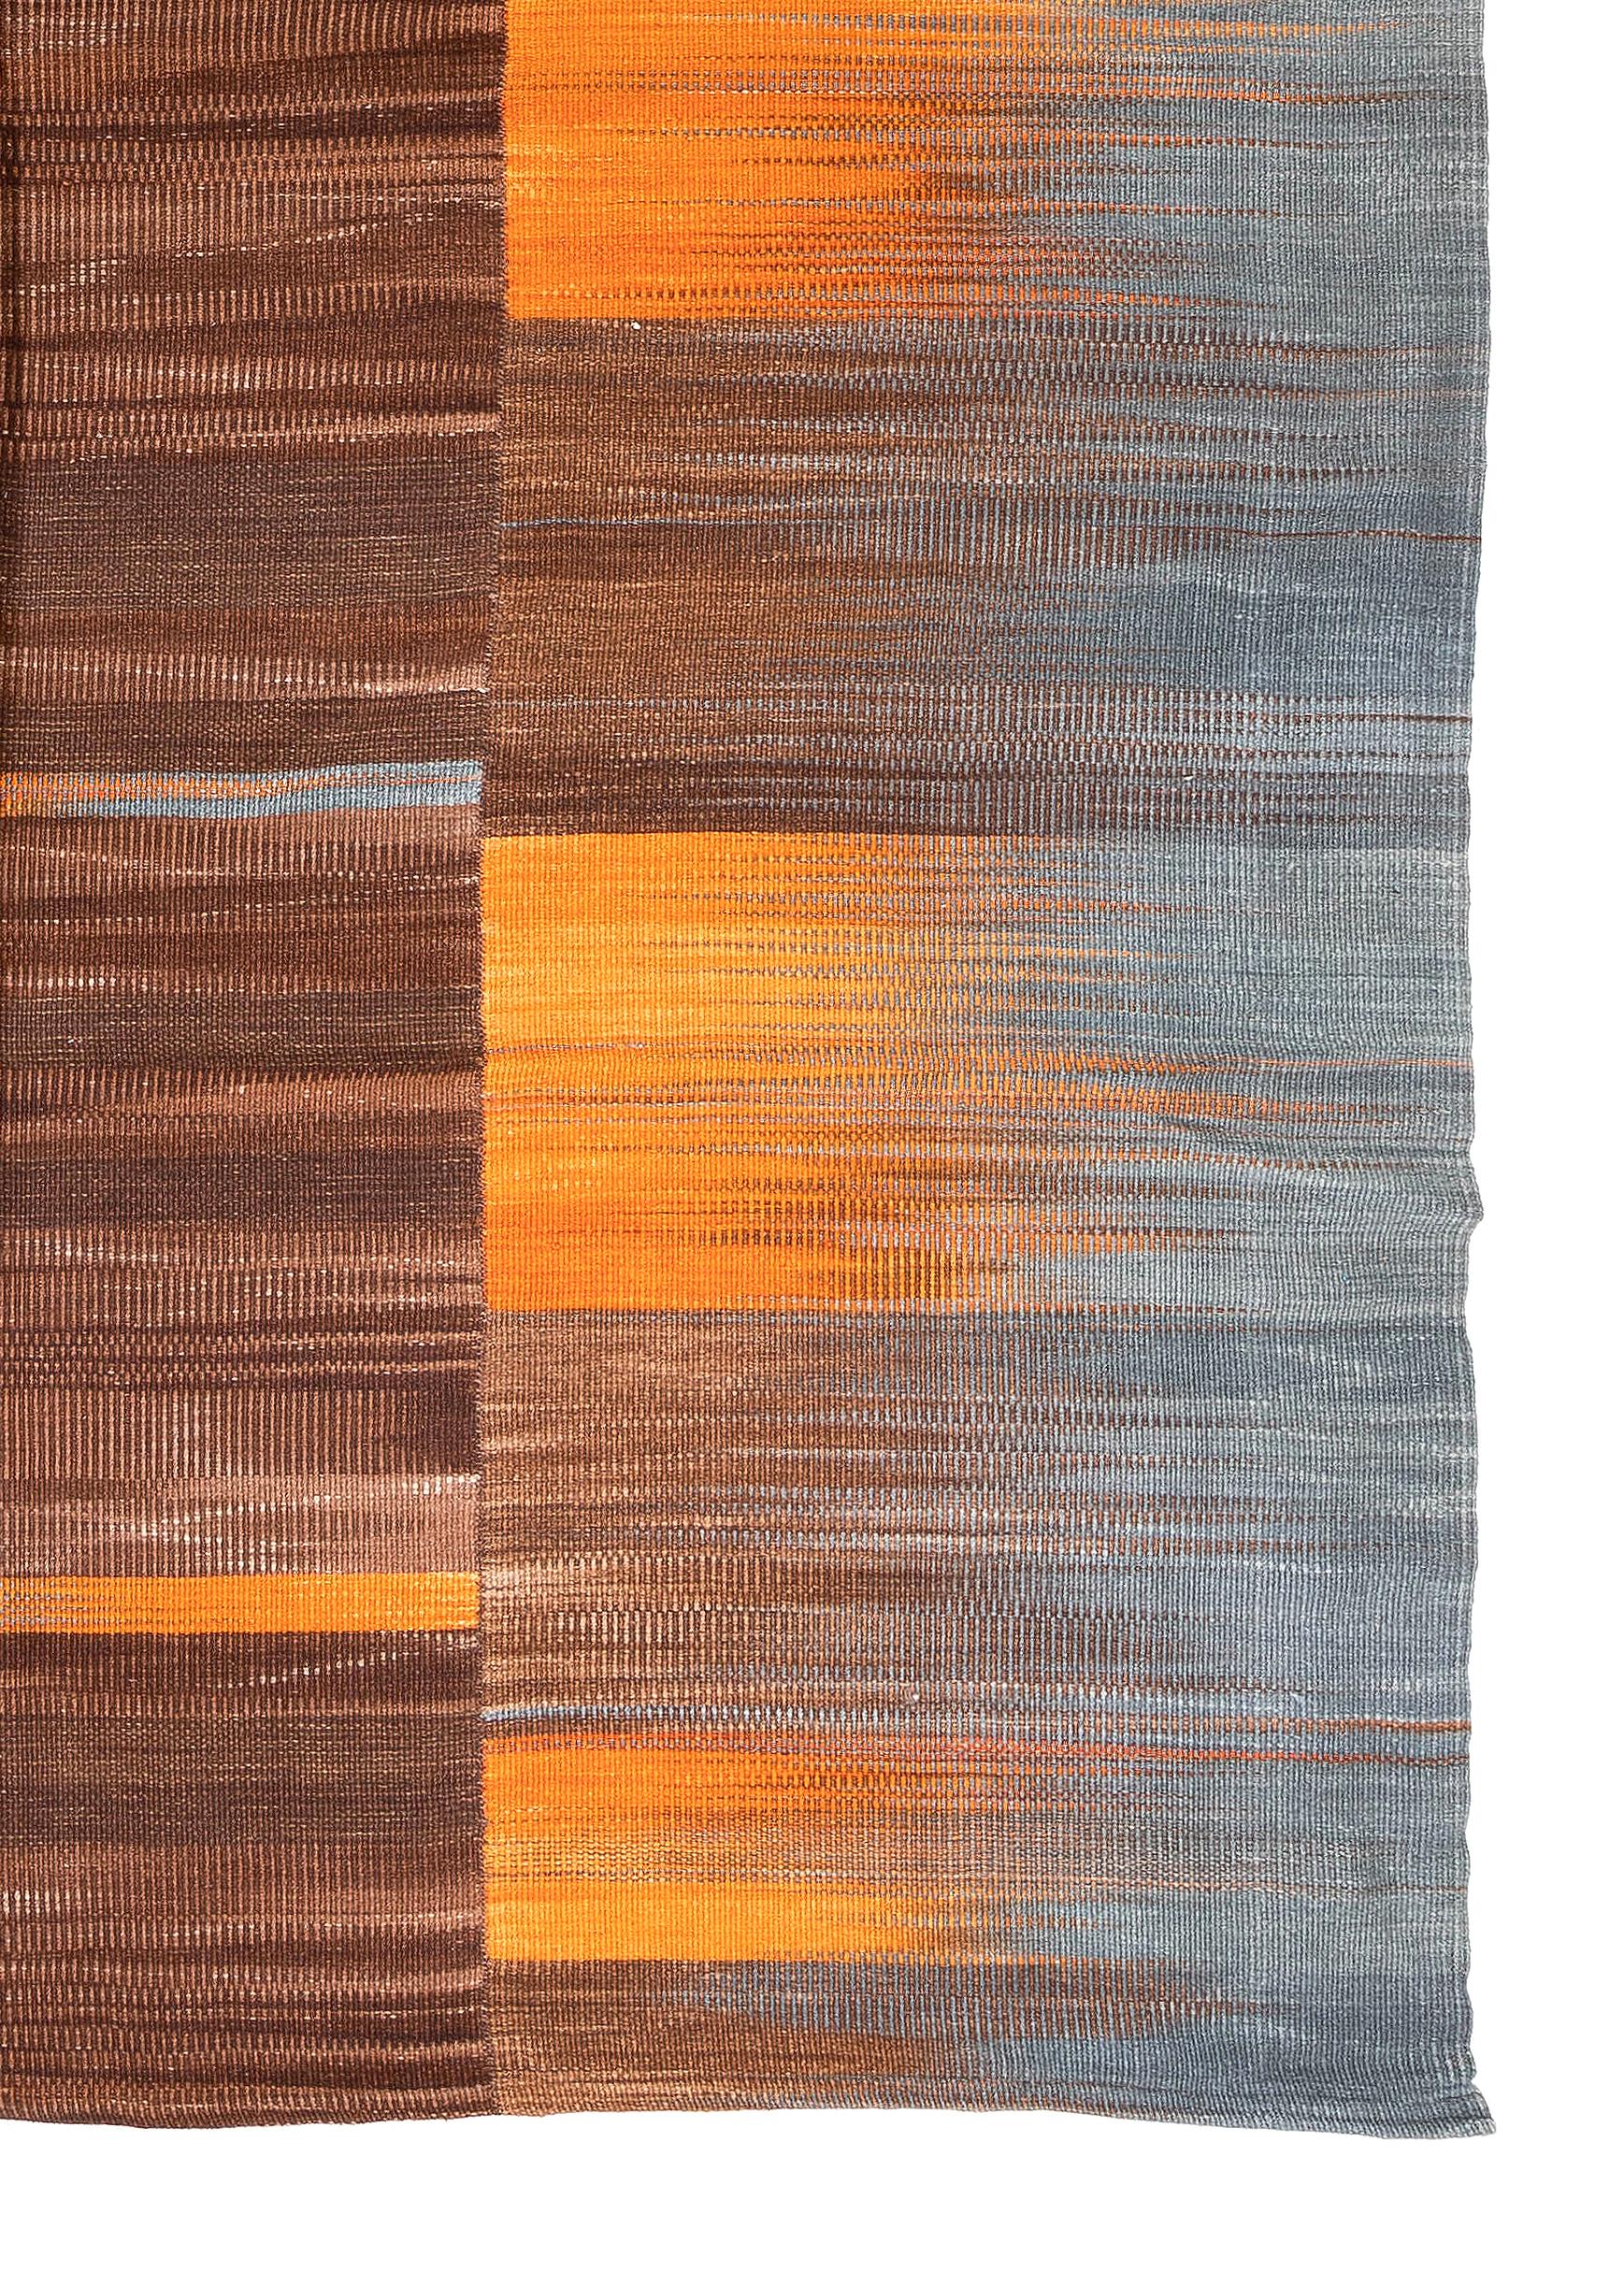 Hand-Woven 7'8'' x 10'9' New Turkish Kilim, Modern Double Sided Rug in Orange, Gray & Brown For Sale